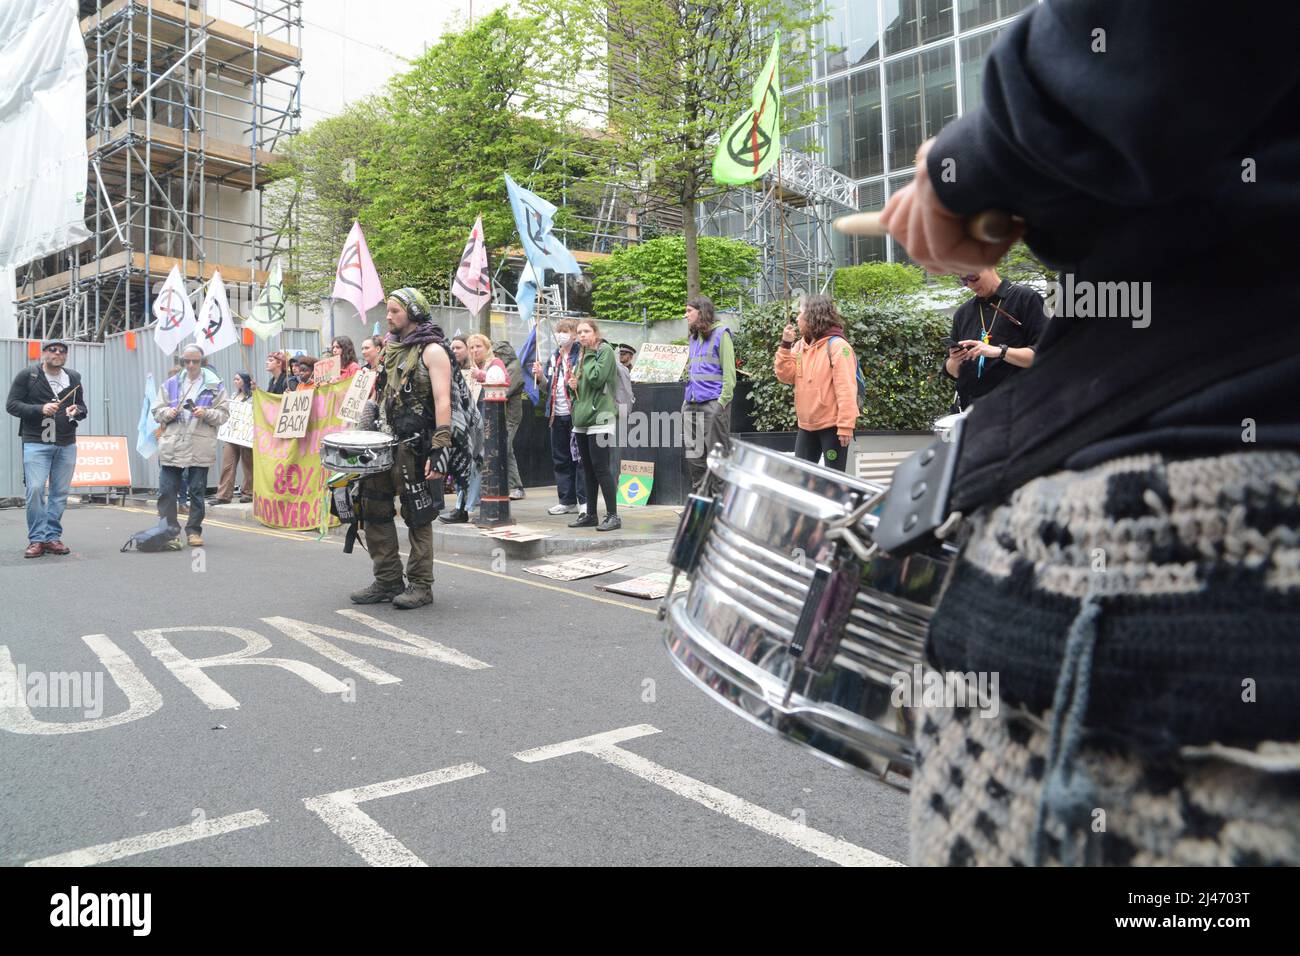 the climate activists xr  group took to the black rock hq following through to block london city roads 'Our reliance on fossil fuels is funding wars, Stock Photo